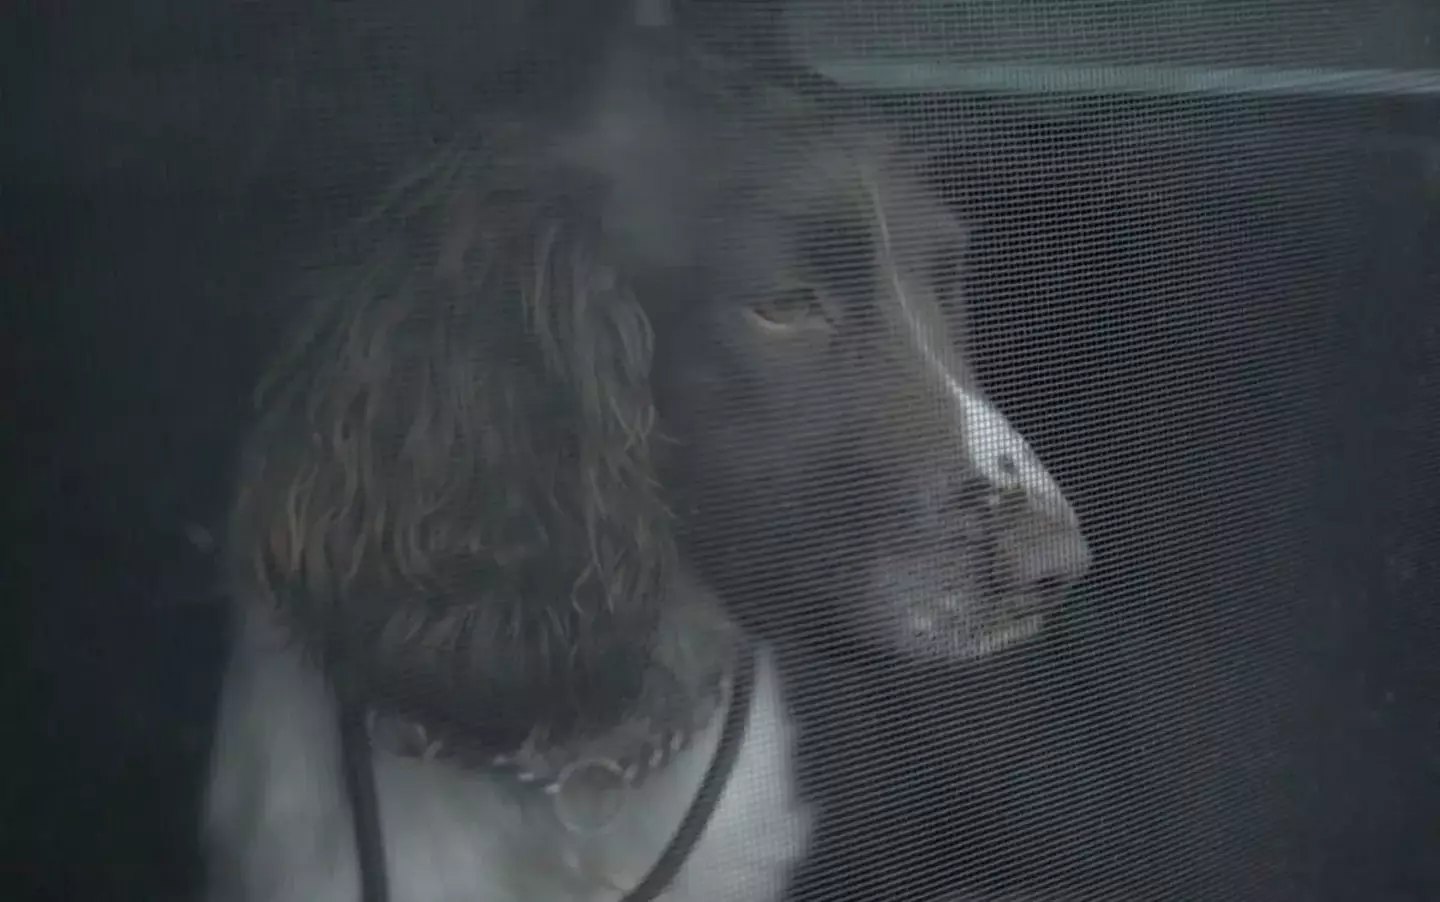 Martin Grime brought his two spaniels, Eddie and Keela, to exercise their expertise at the crime scene (Netflix)